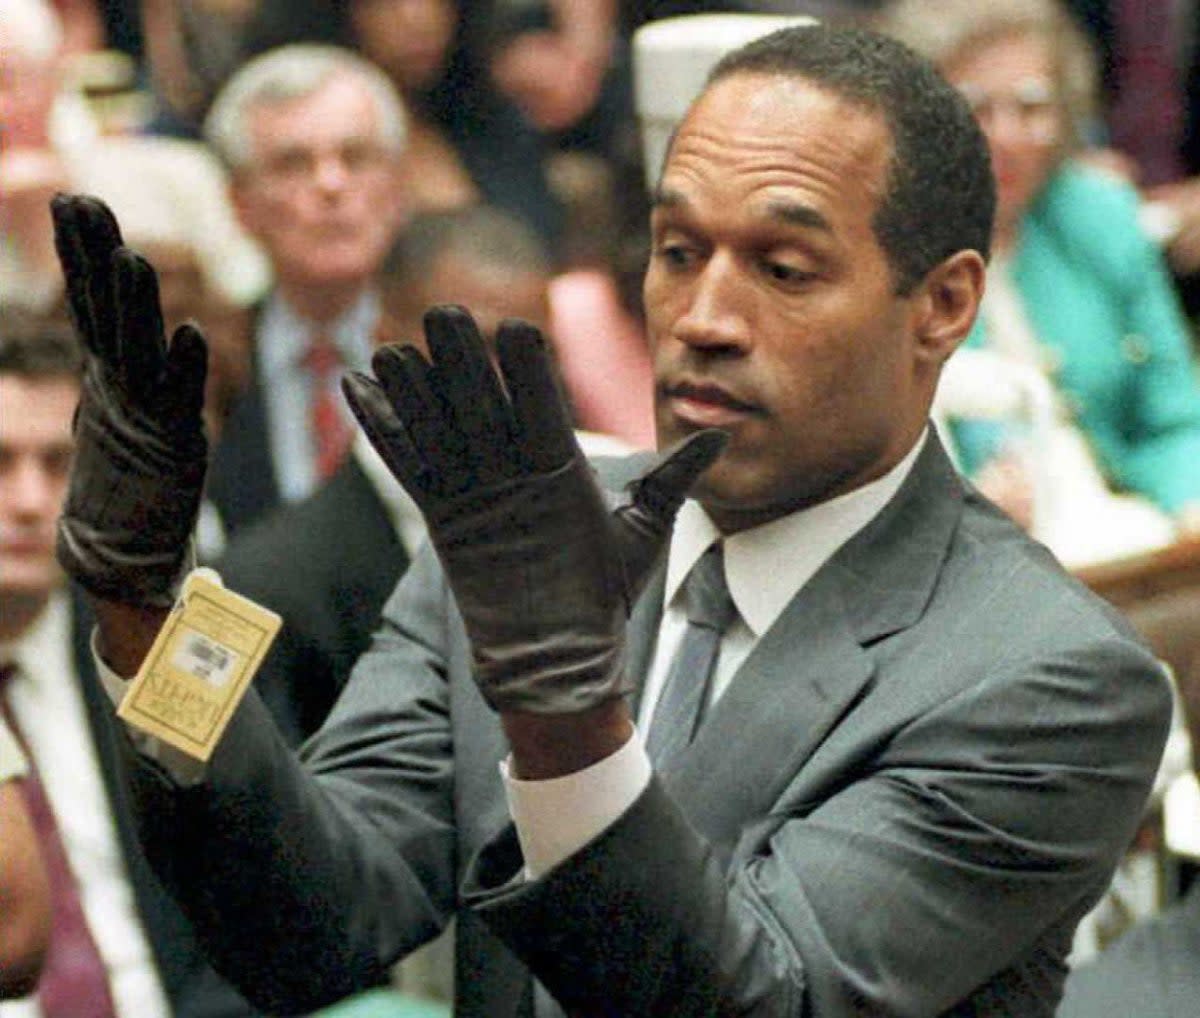 OJ Simpson looks at a new pair of Aris extra-large gloves that prosecutors had him put on 21 June 1995 during his double-murder trial in Los Angeles. (AFP via Getty Images)